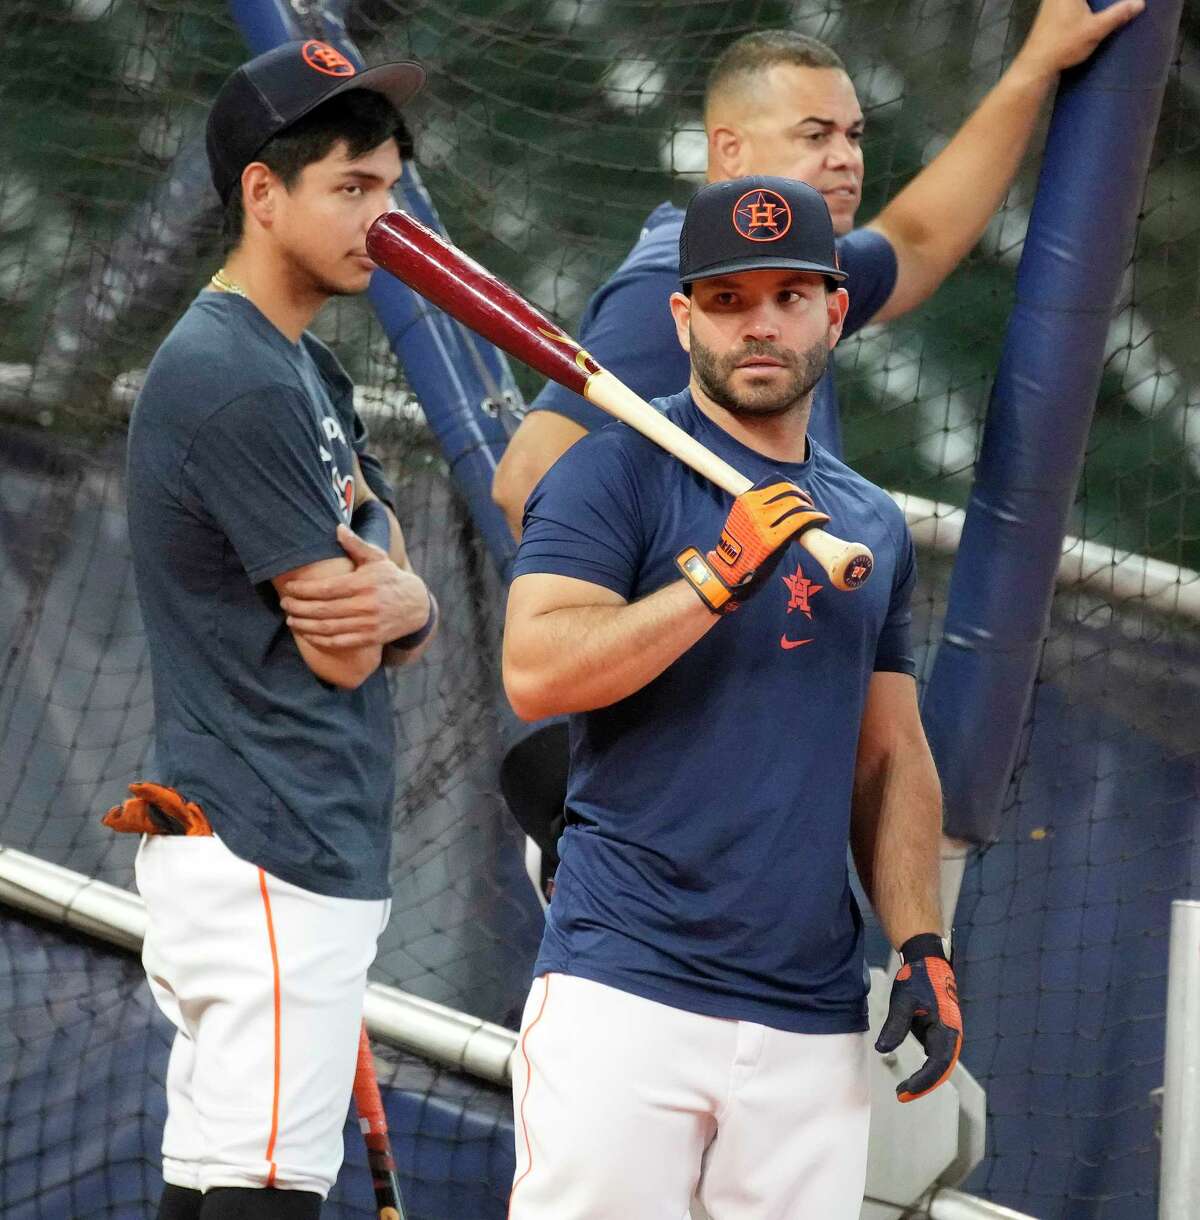 Houston Astros Jose Altuve takes batting practice before the start of a MLB baseball game at Minute Maid Park on Saturday, July 16, 2022 in Houston.